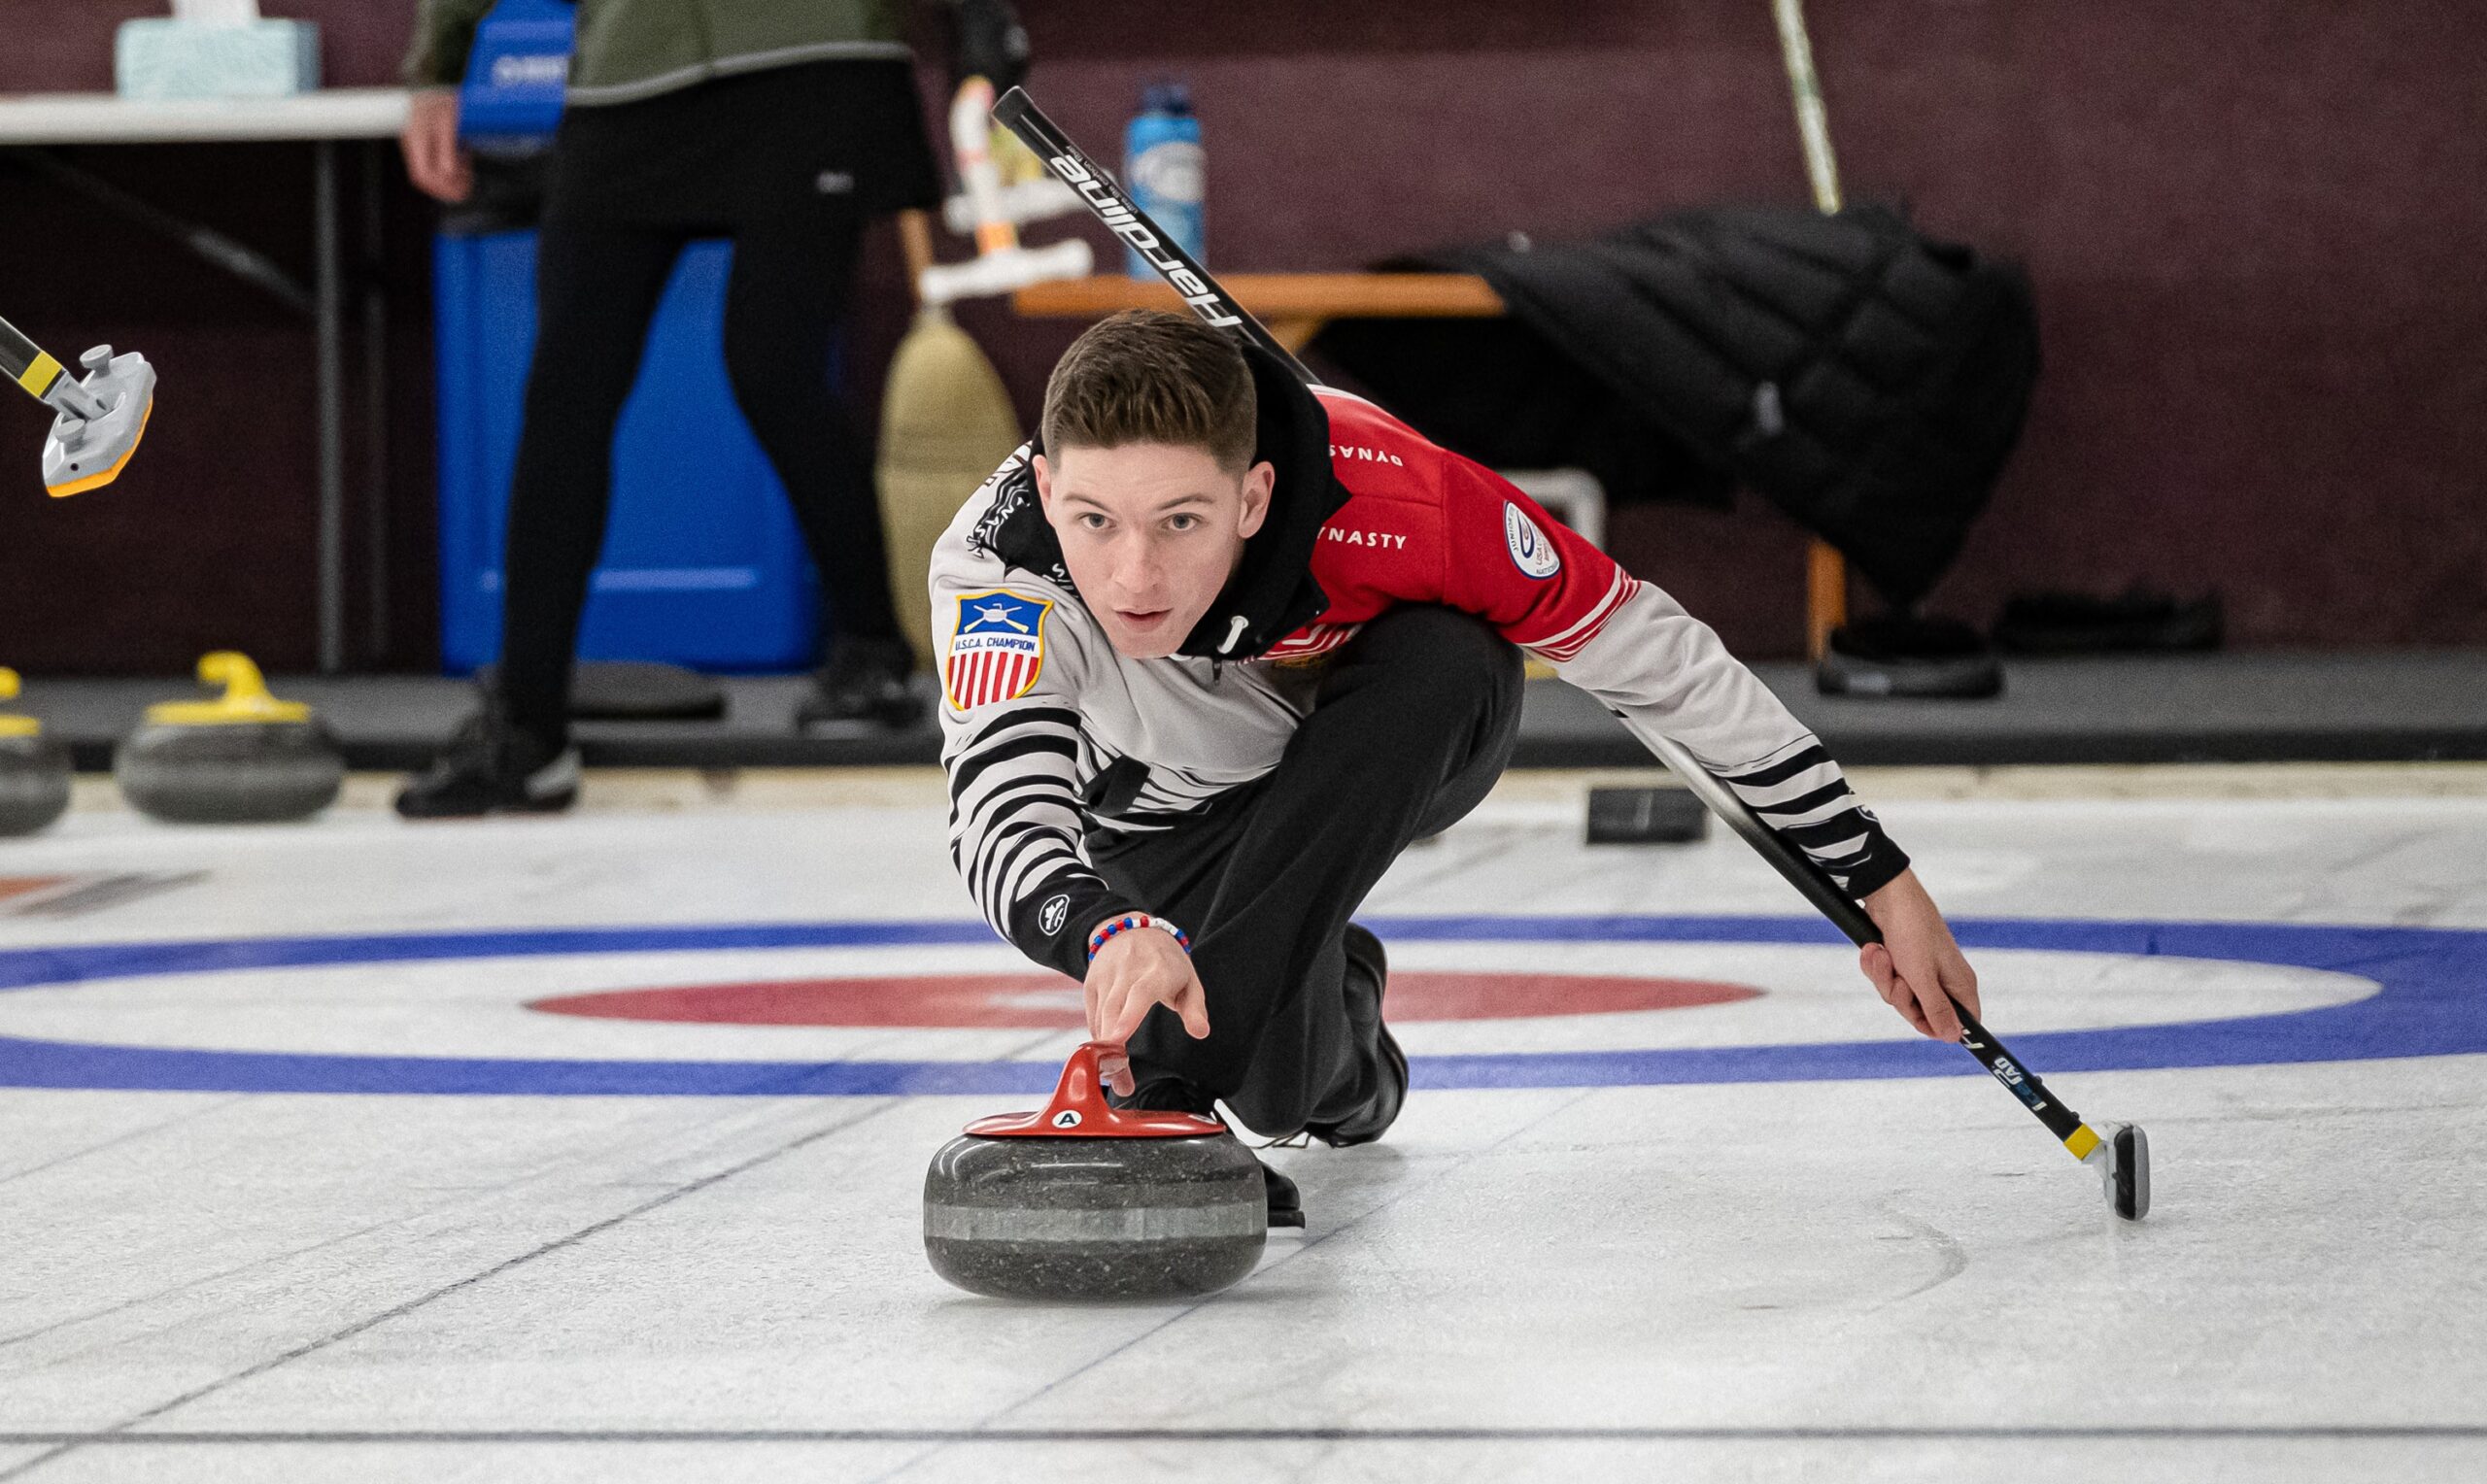 Eau Claire Teen To Represent US In Youth Olympic Curling